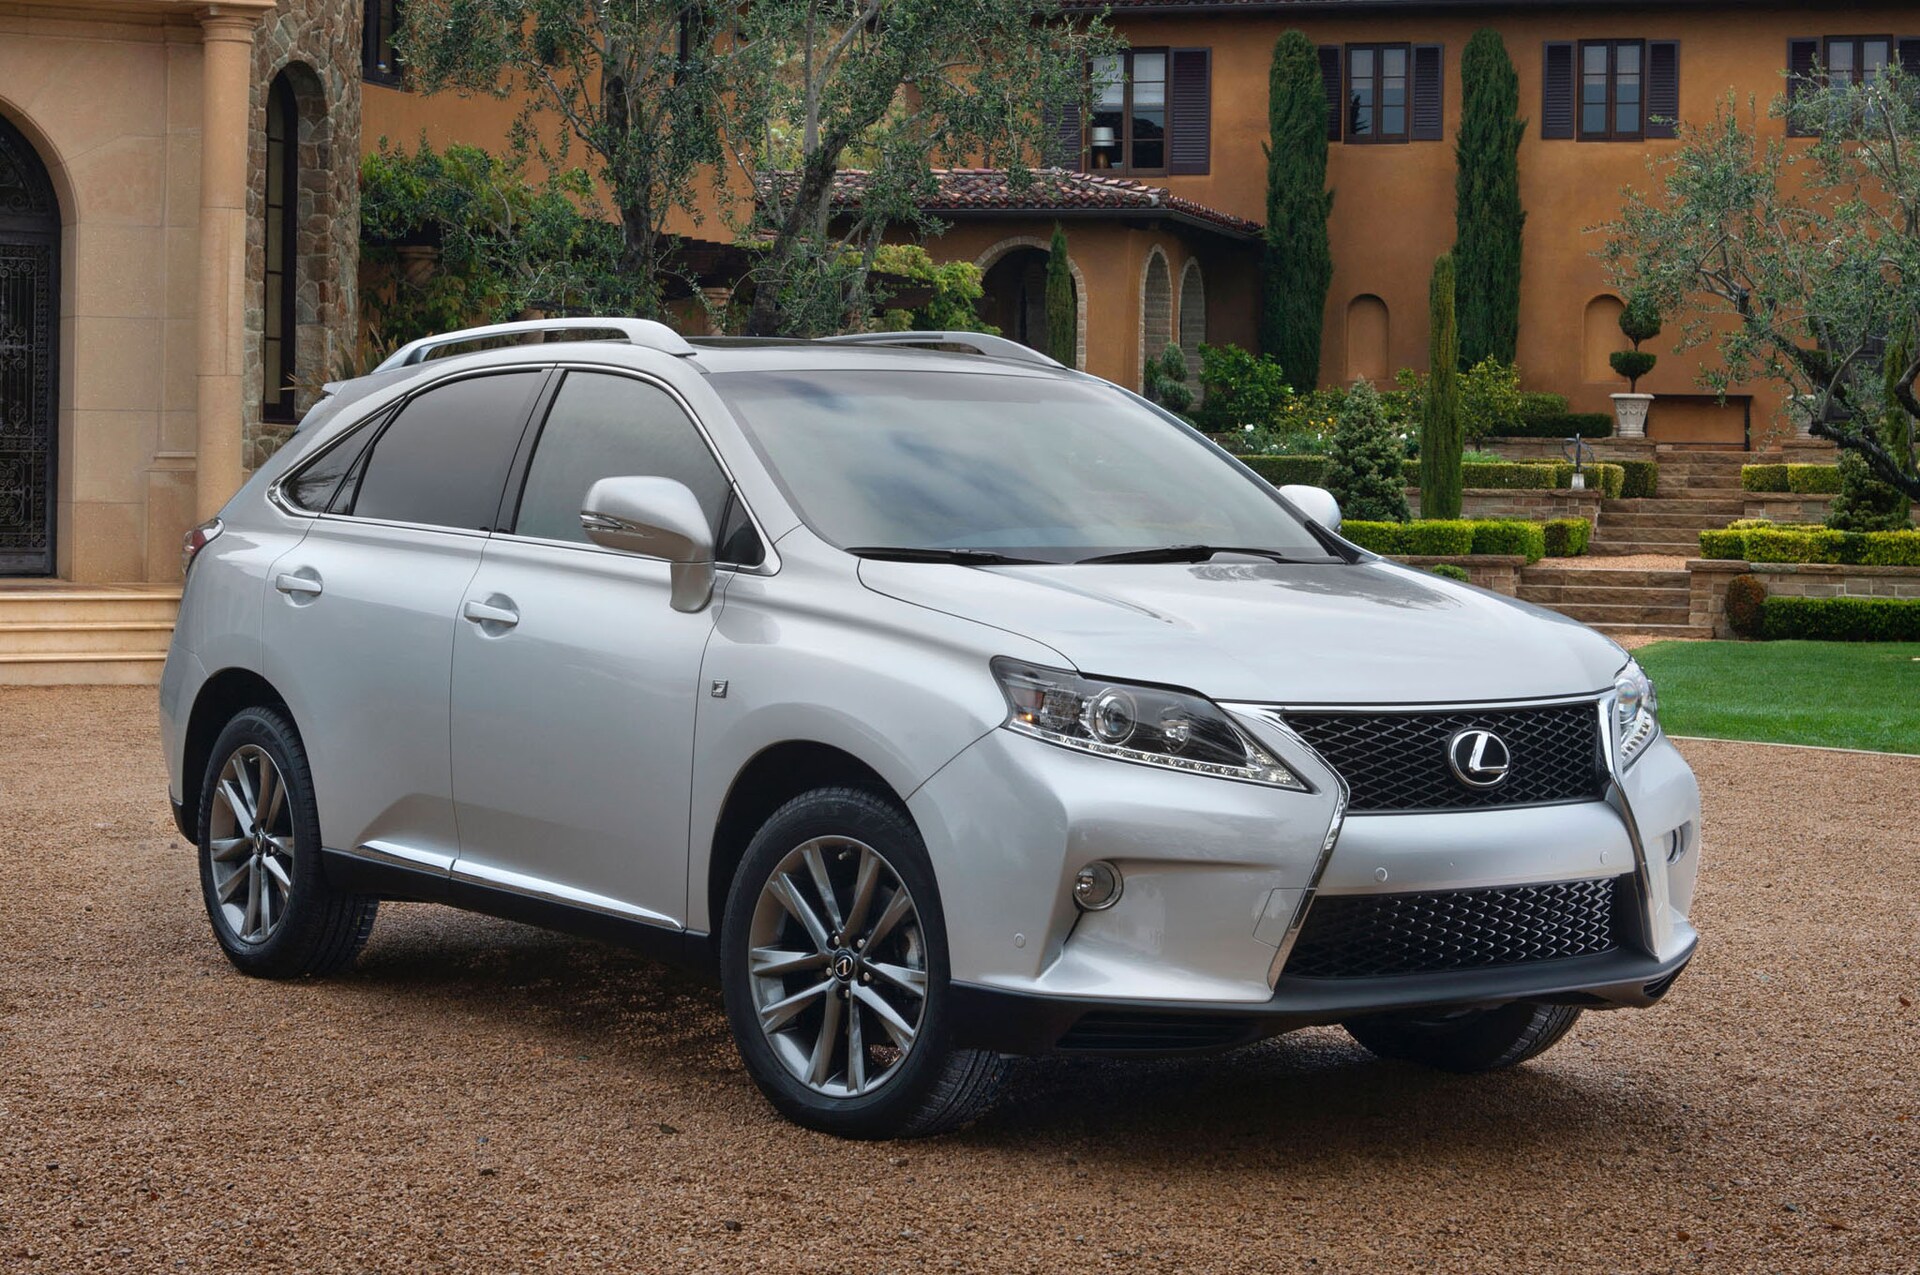 2014 Lexus RX350 Priced at $40,670, RX450h From $47,320